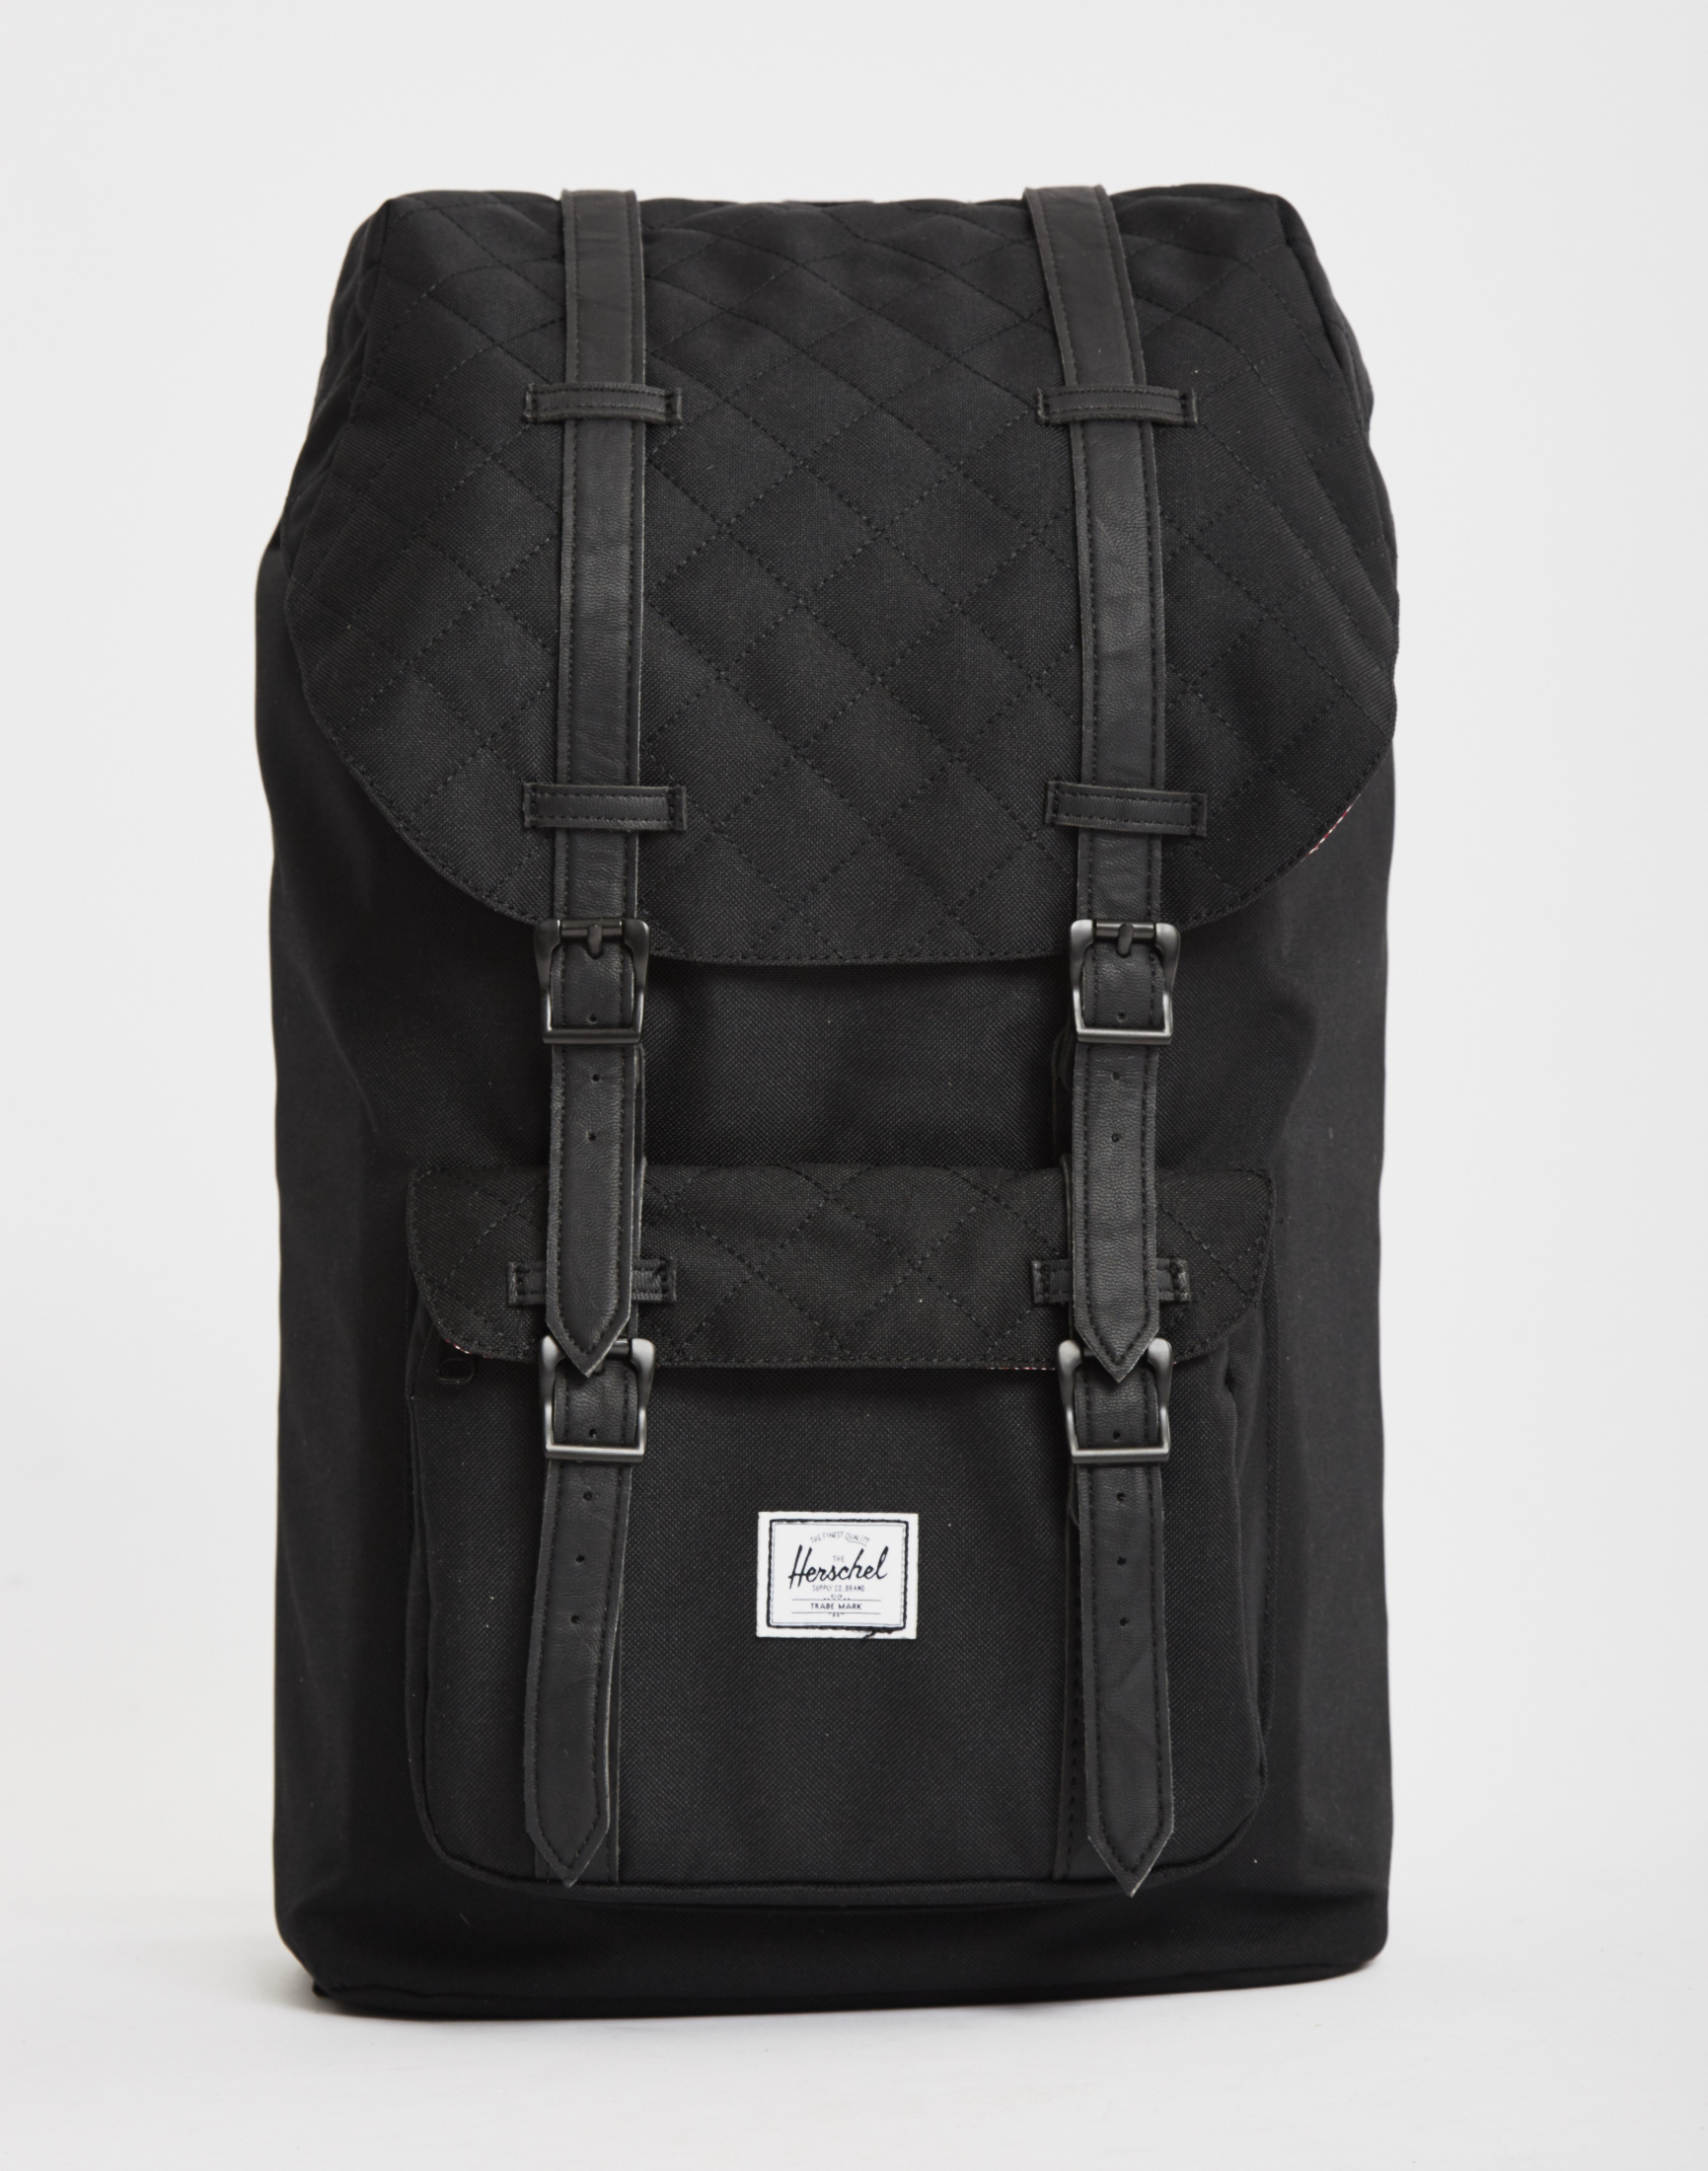 Lyst - Herschel Supply Co. Little America Quilted Backpack Black in ...